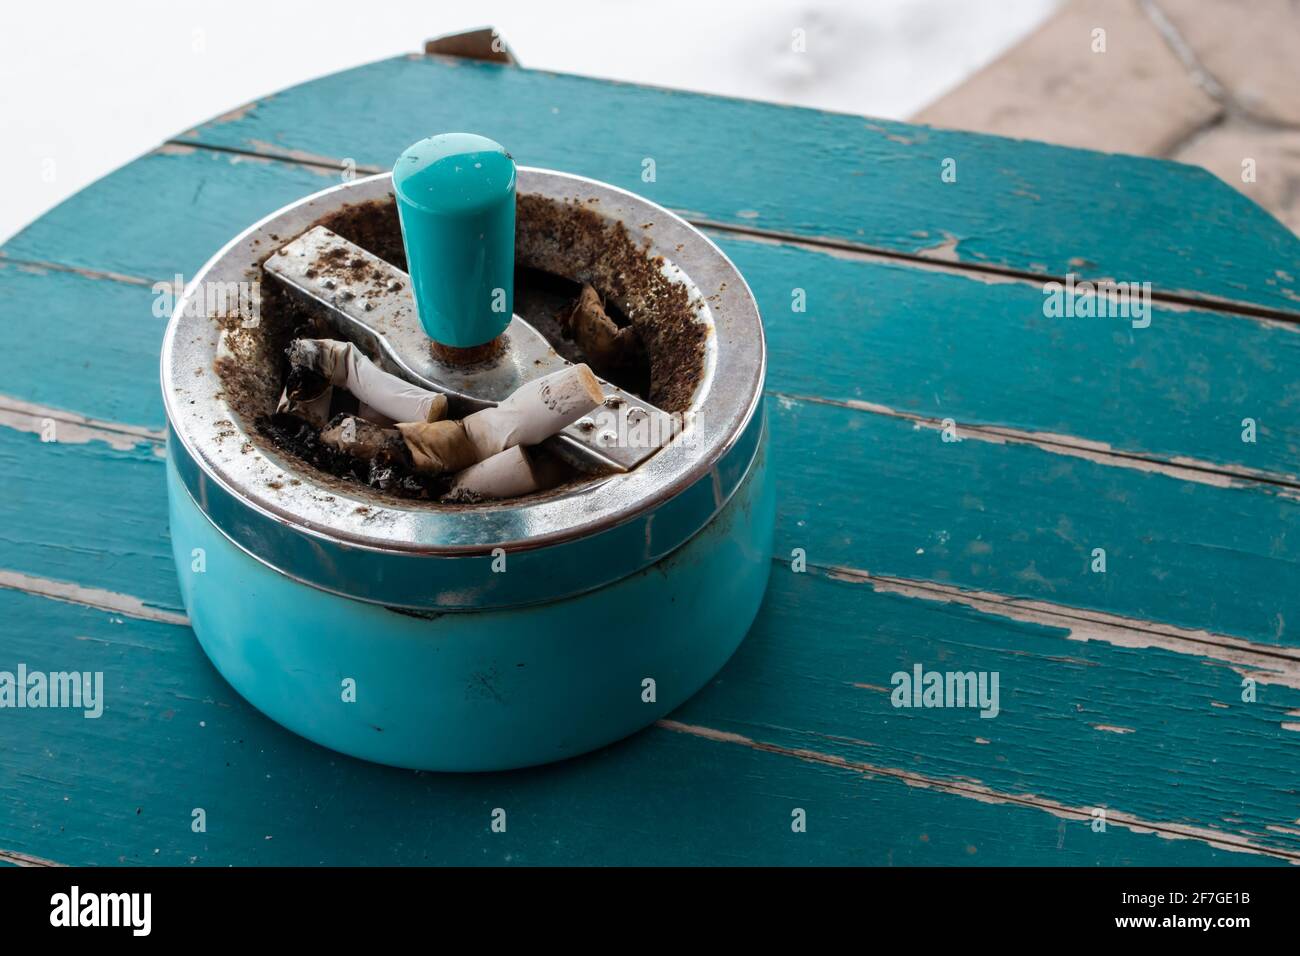 A retro, antique cigarette ashtray filled with stubs on a turquoise sanded wooden table top. Angle side view. Stock Photo